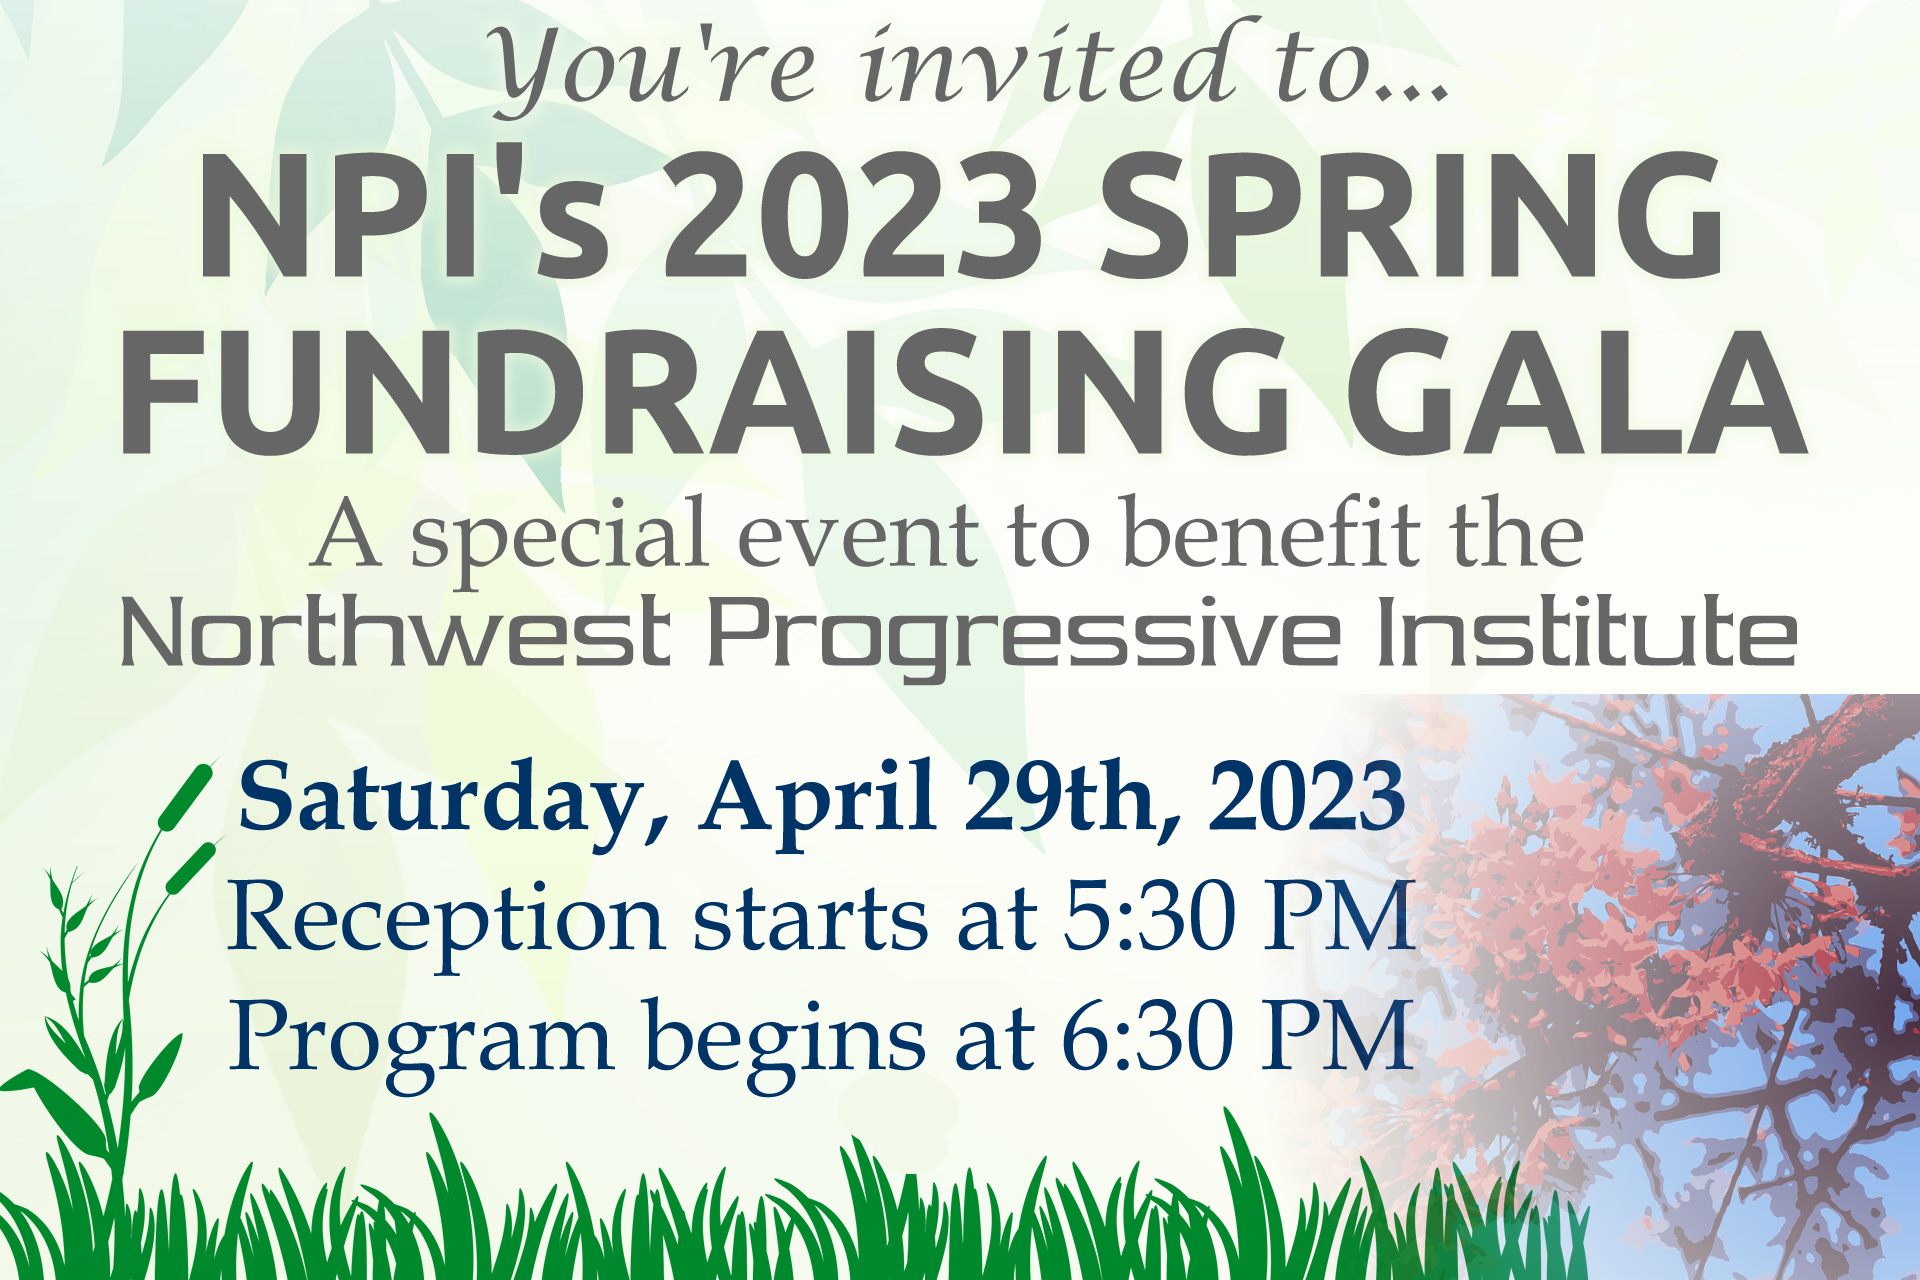 Join us for NPI's 2023 Spring Fundraising Gala